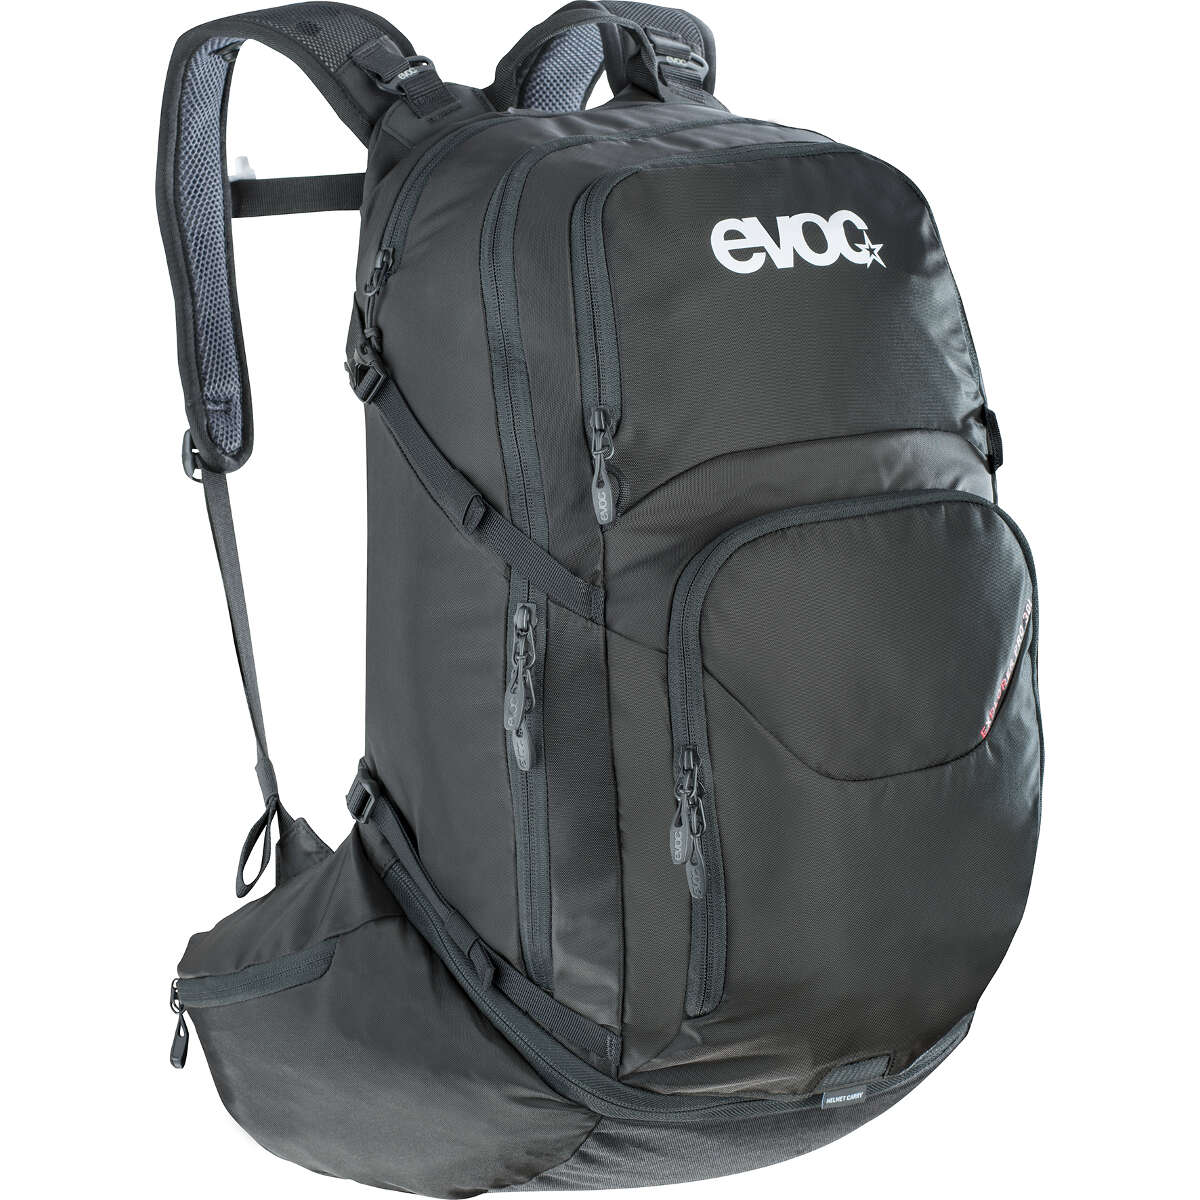 Evoc Backpack with Hydration System Compartment Explorer Pro Black